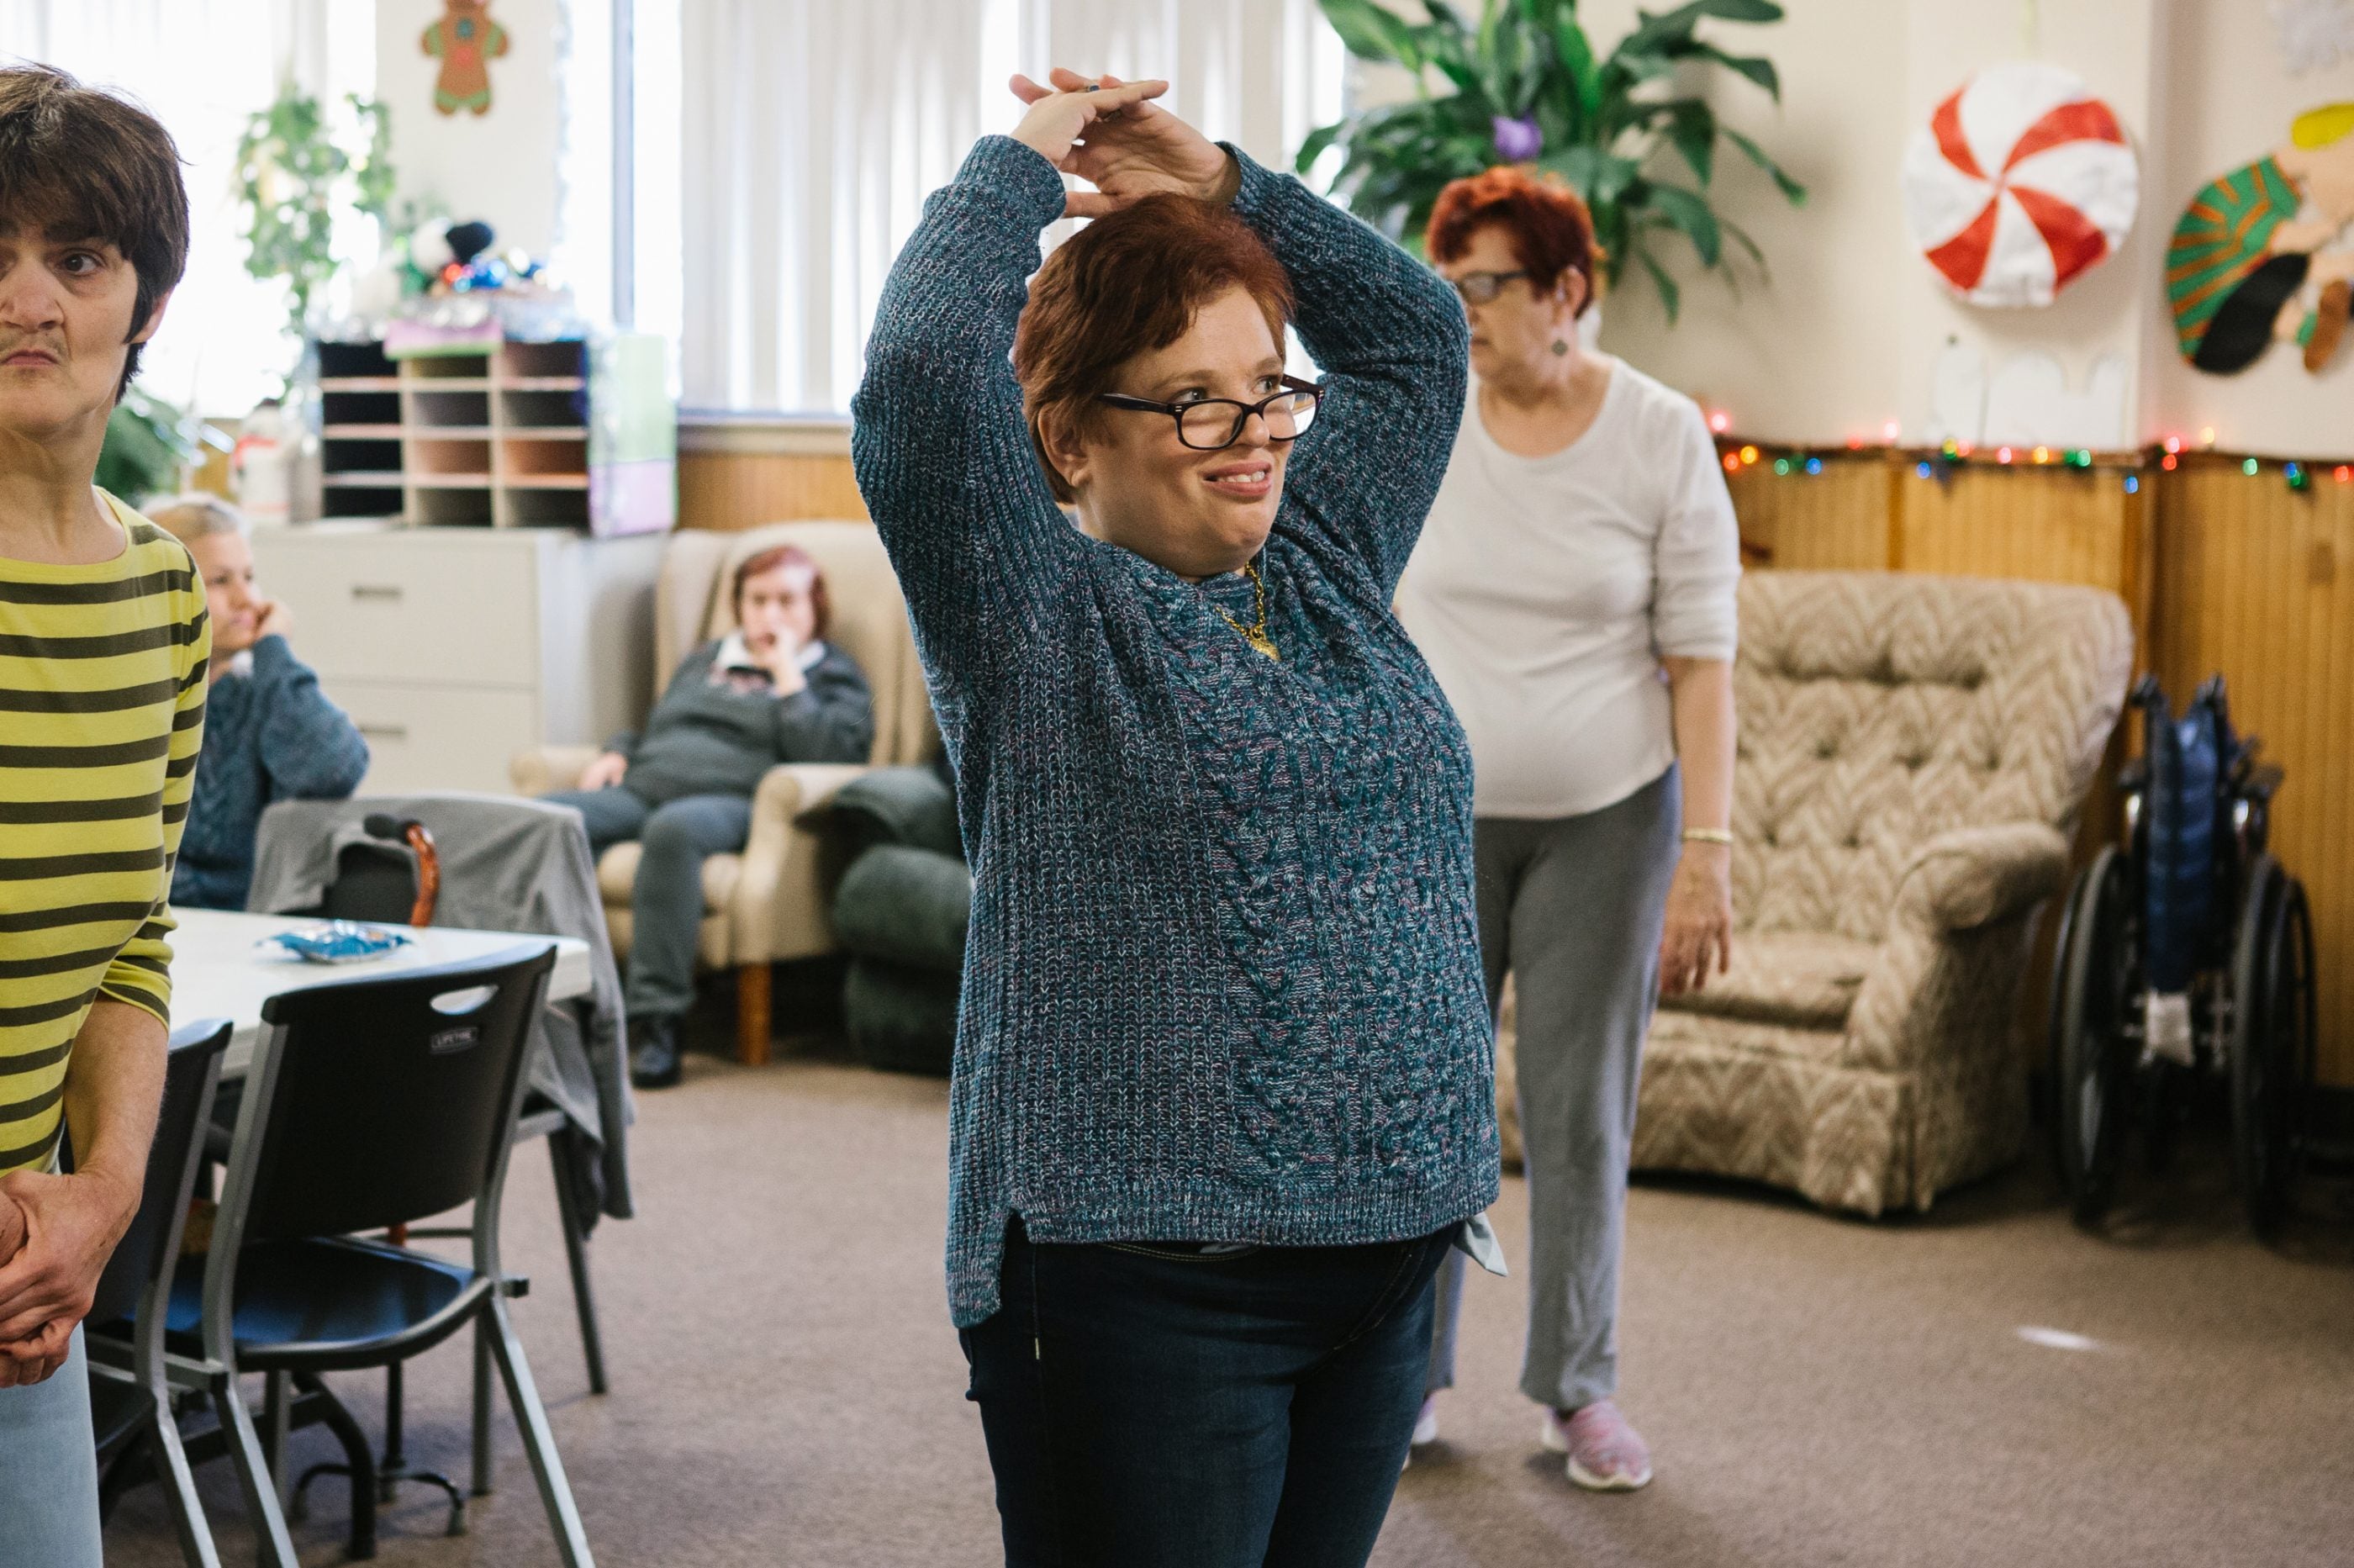 Pauline dances along to a video during a morning exercise routine at the Arc Northeastern Pennsylvania.